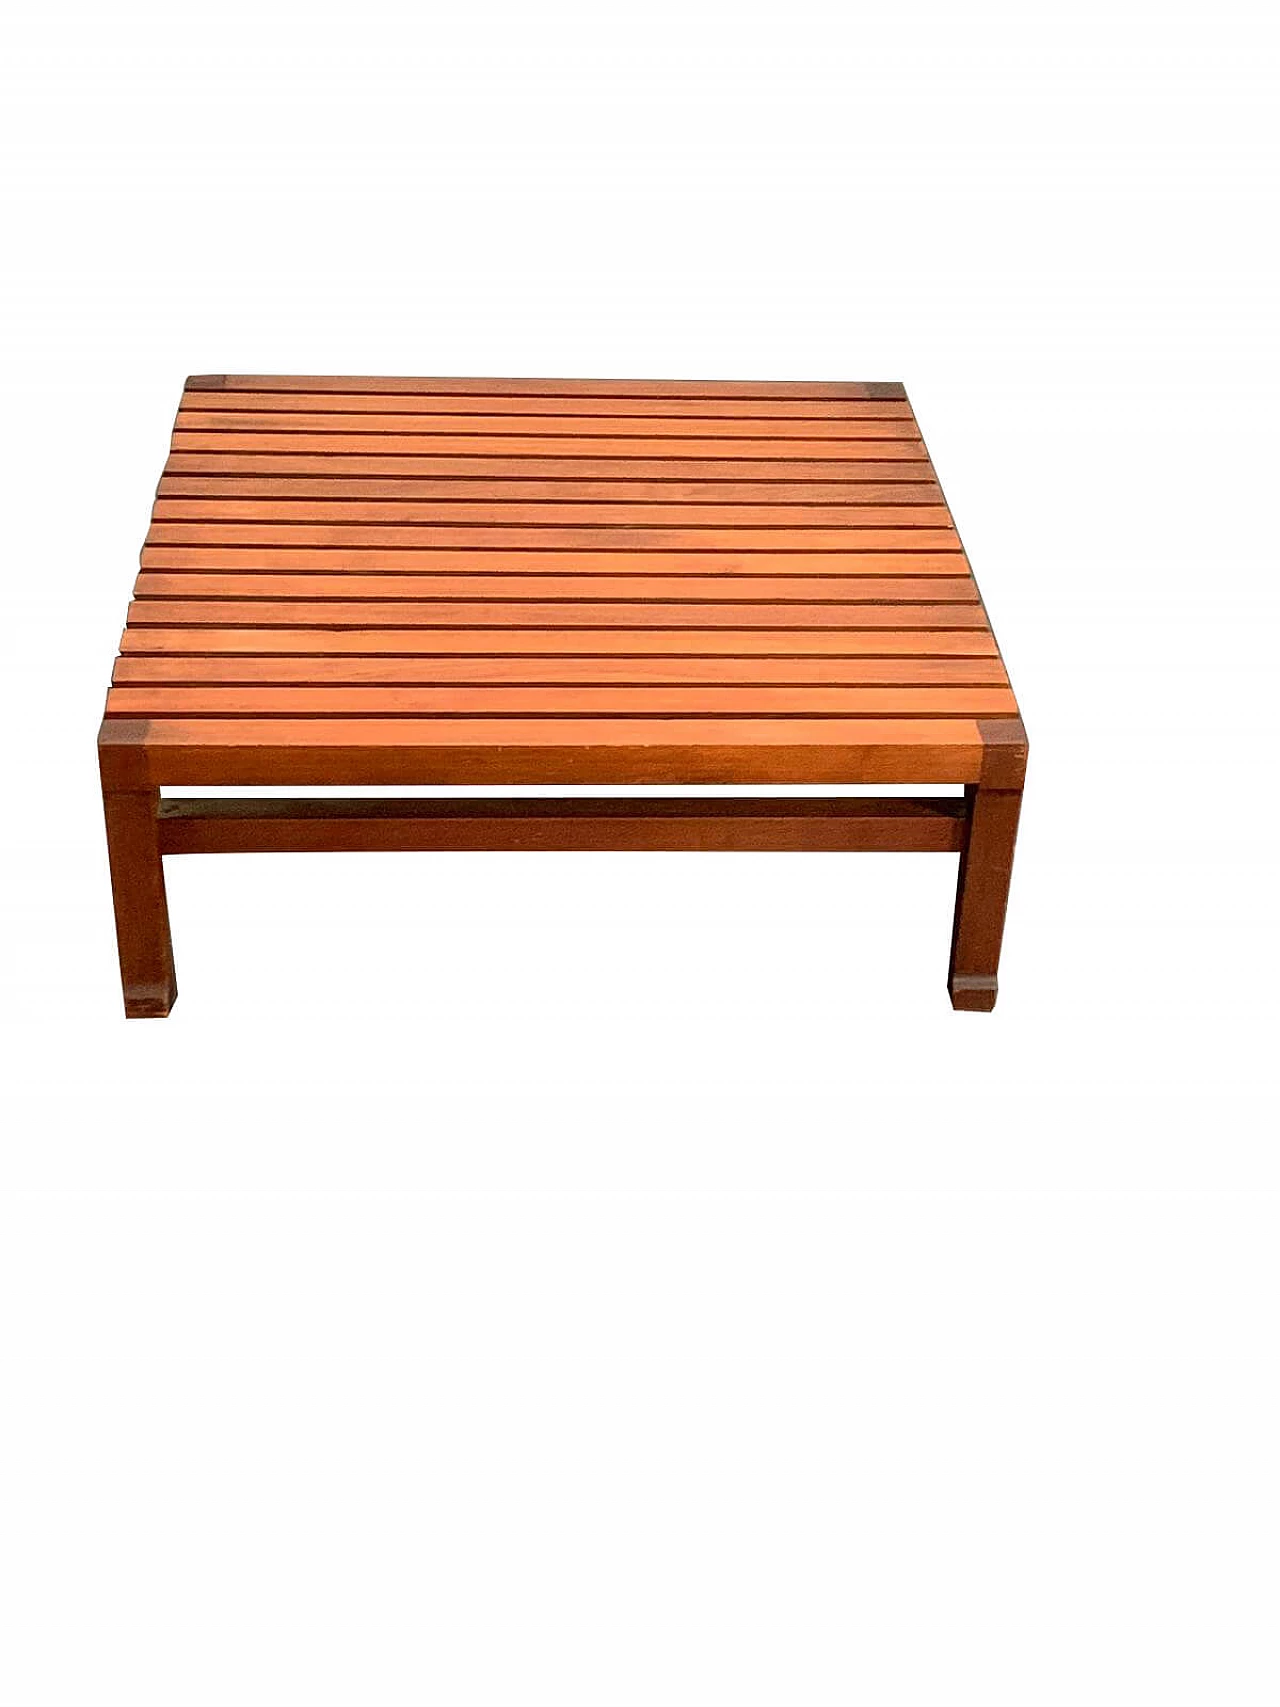 Ico and Luisa Parisi teak coffee table in the style of Ico and Luisa Parisi, 60s 1093112